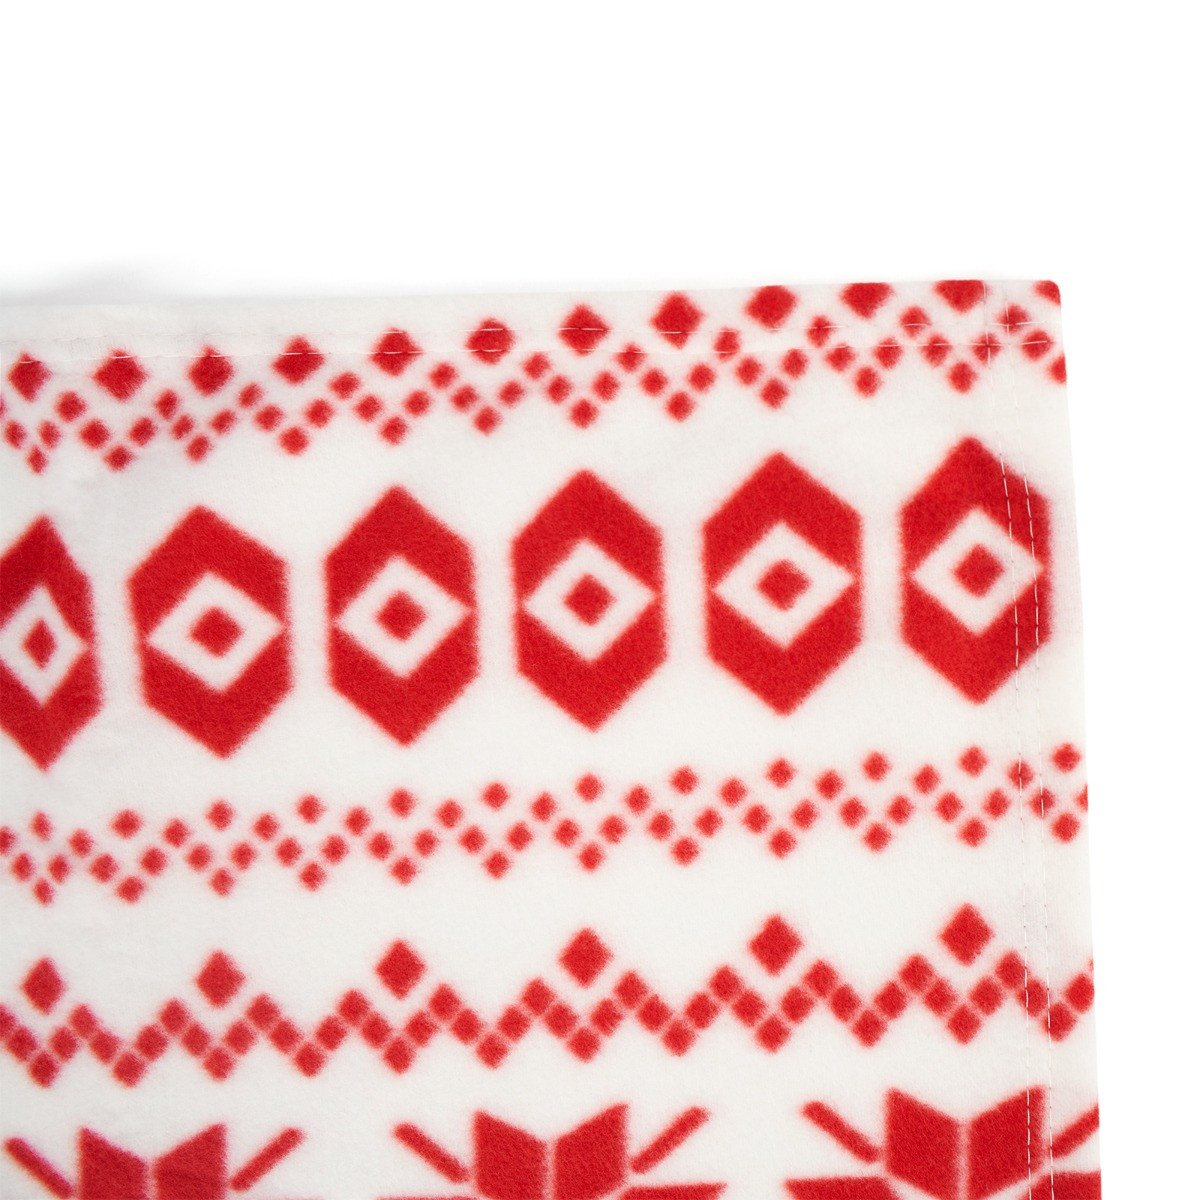 OHS Christmas Nordic Star Fleece Throw - Red/White>